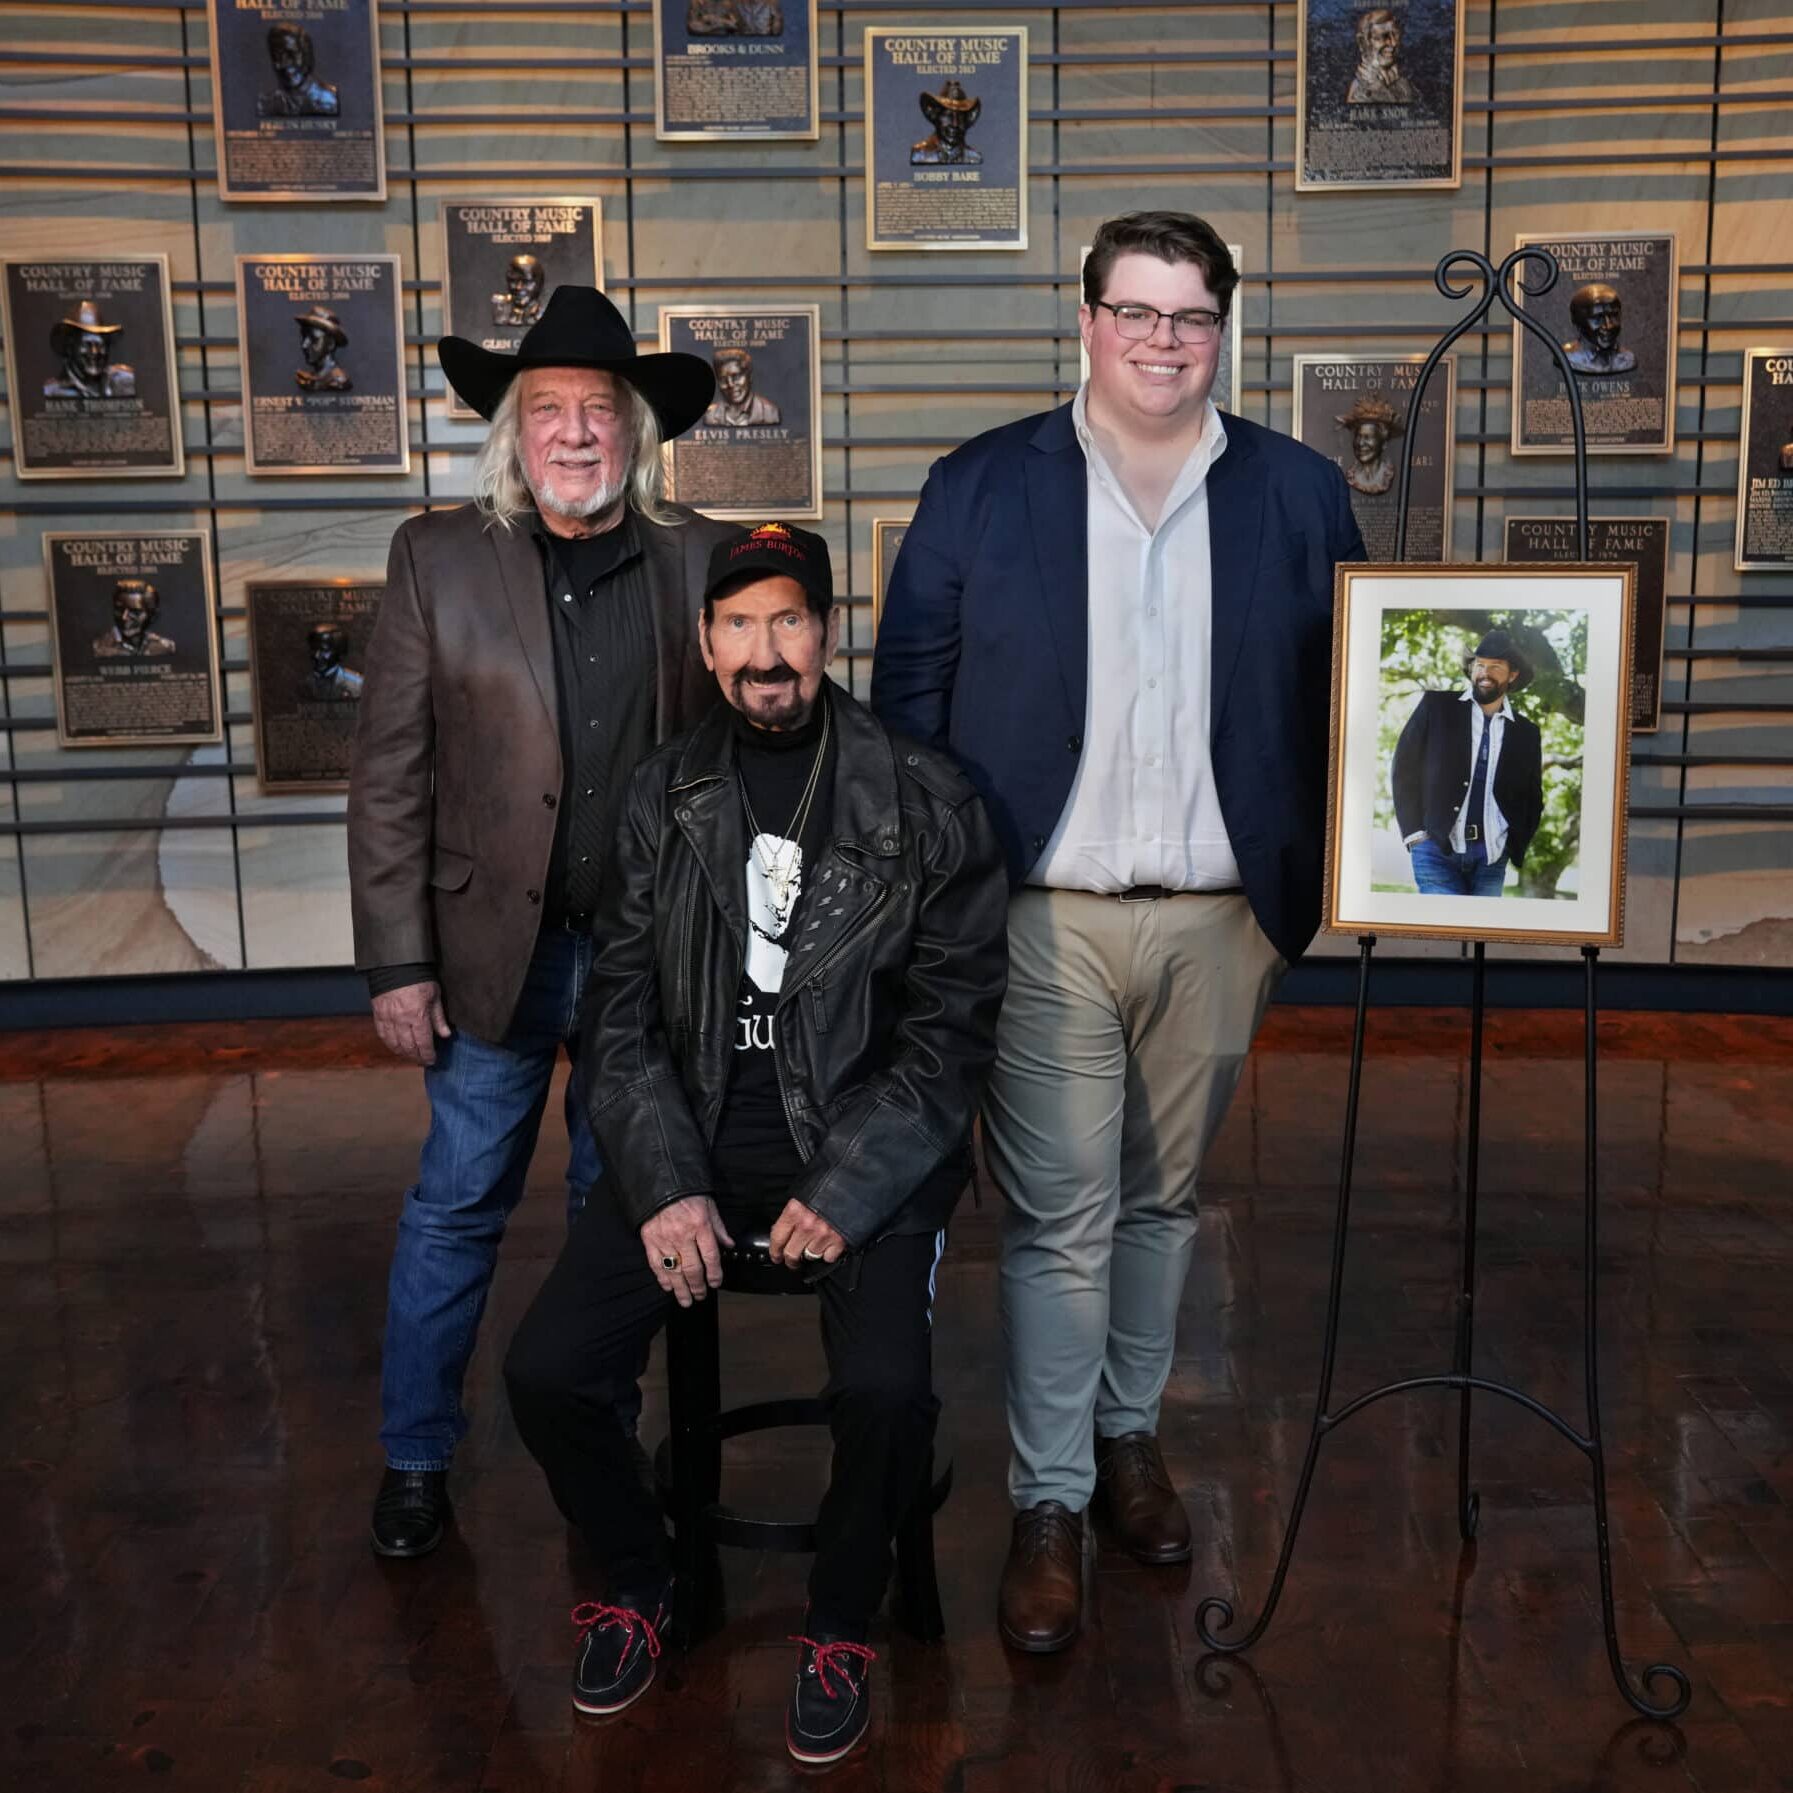 The 2024 Country Music Hall of Fame inductees were announced on Monday, March 18: John Anderson (Veterans Era Inductee), James Burton (Musician Inductee) and Toby Keith (Modern Era Inductee).